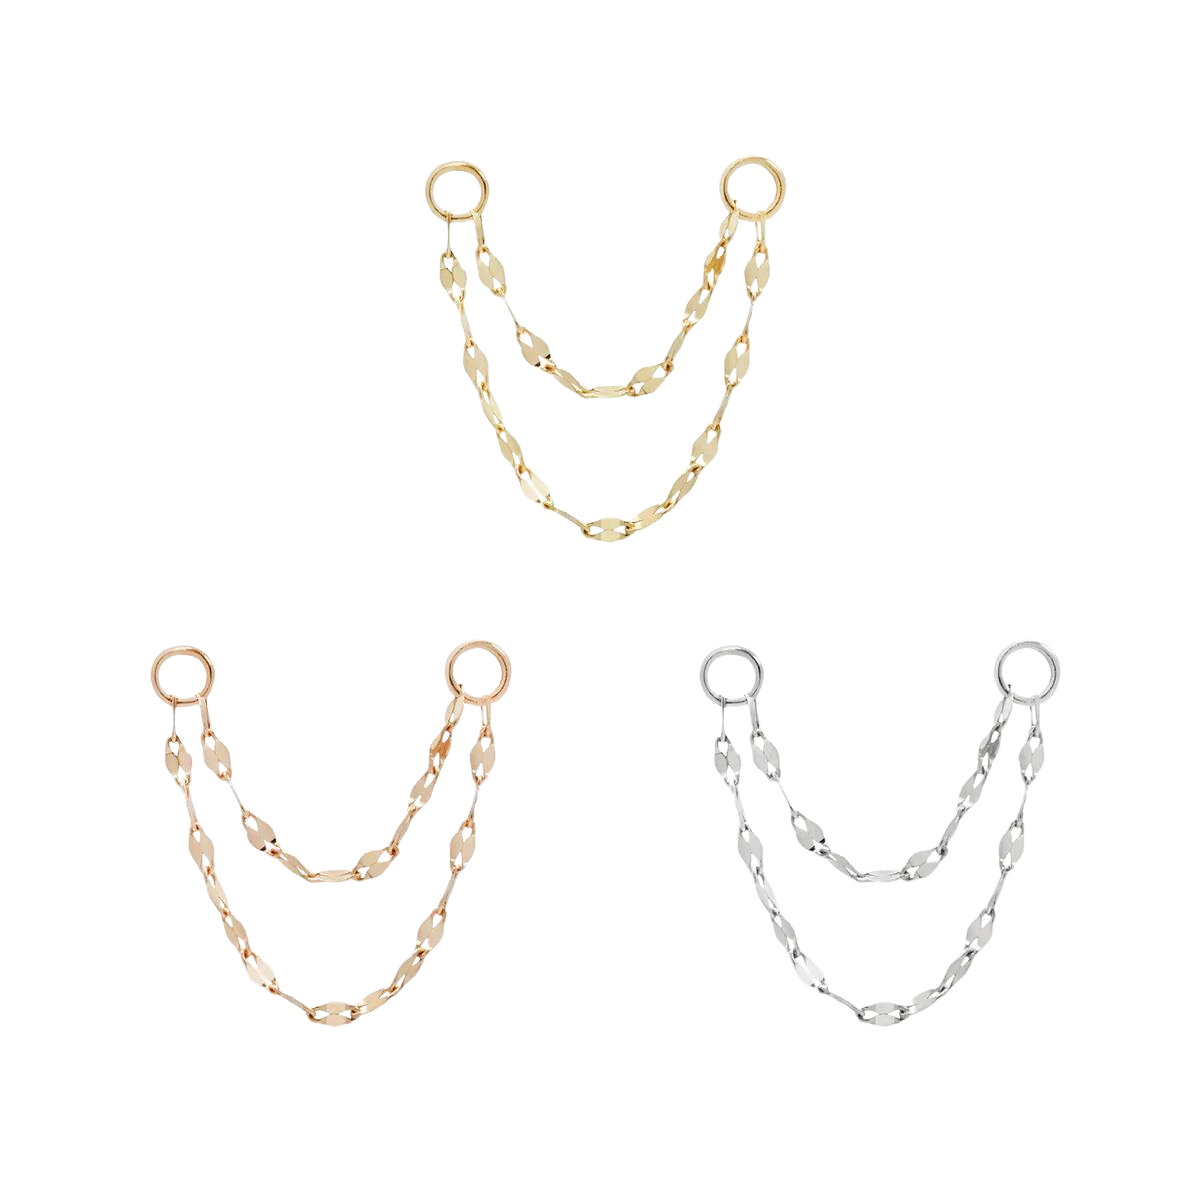 DOUBLE TILE CHAIN - SOLID 14KT GOLD piercing-zone.com